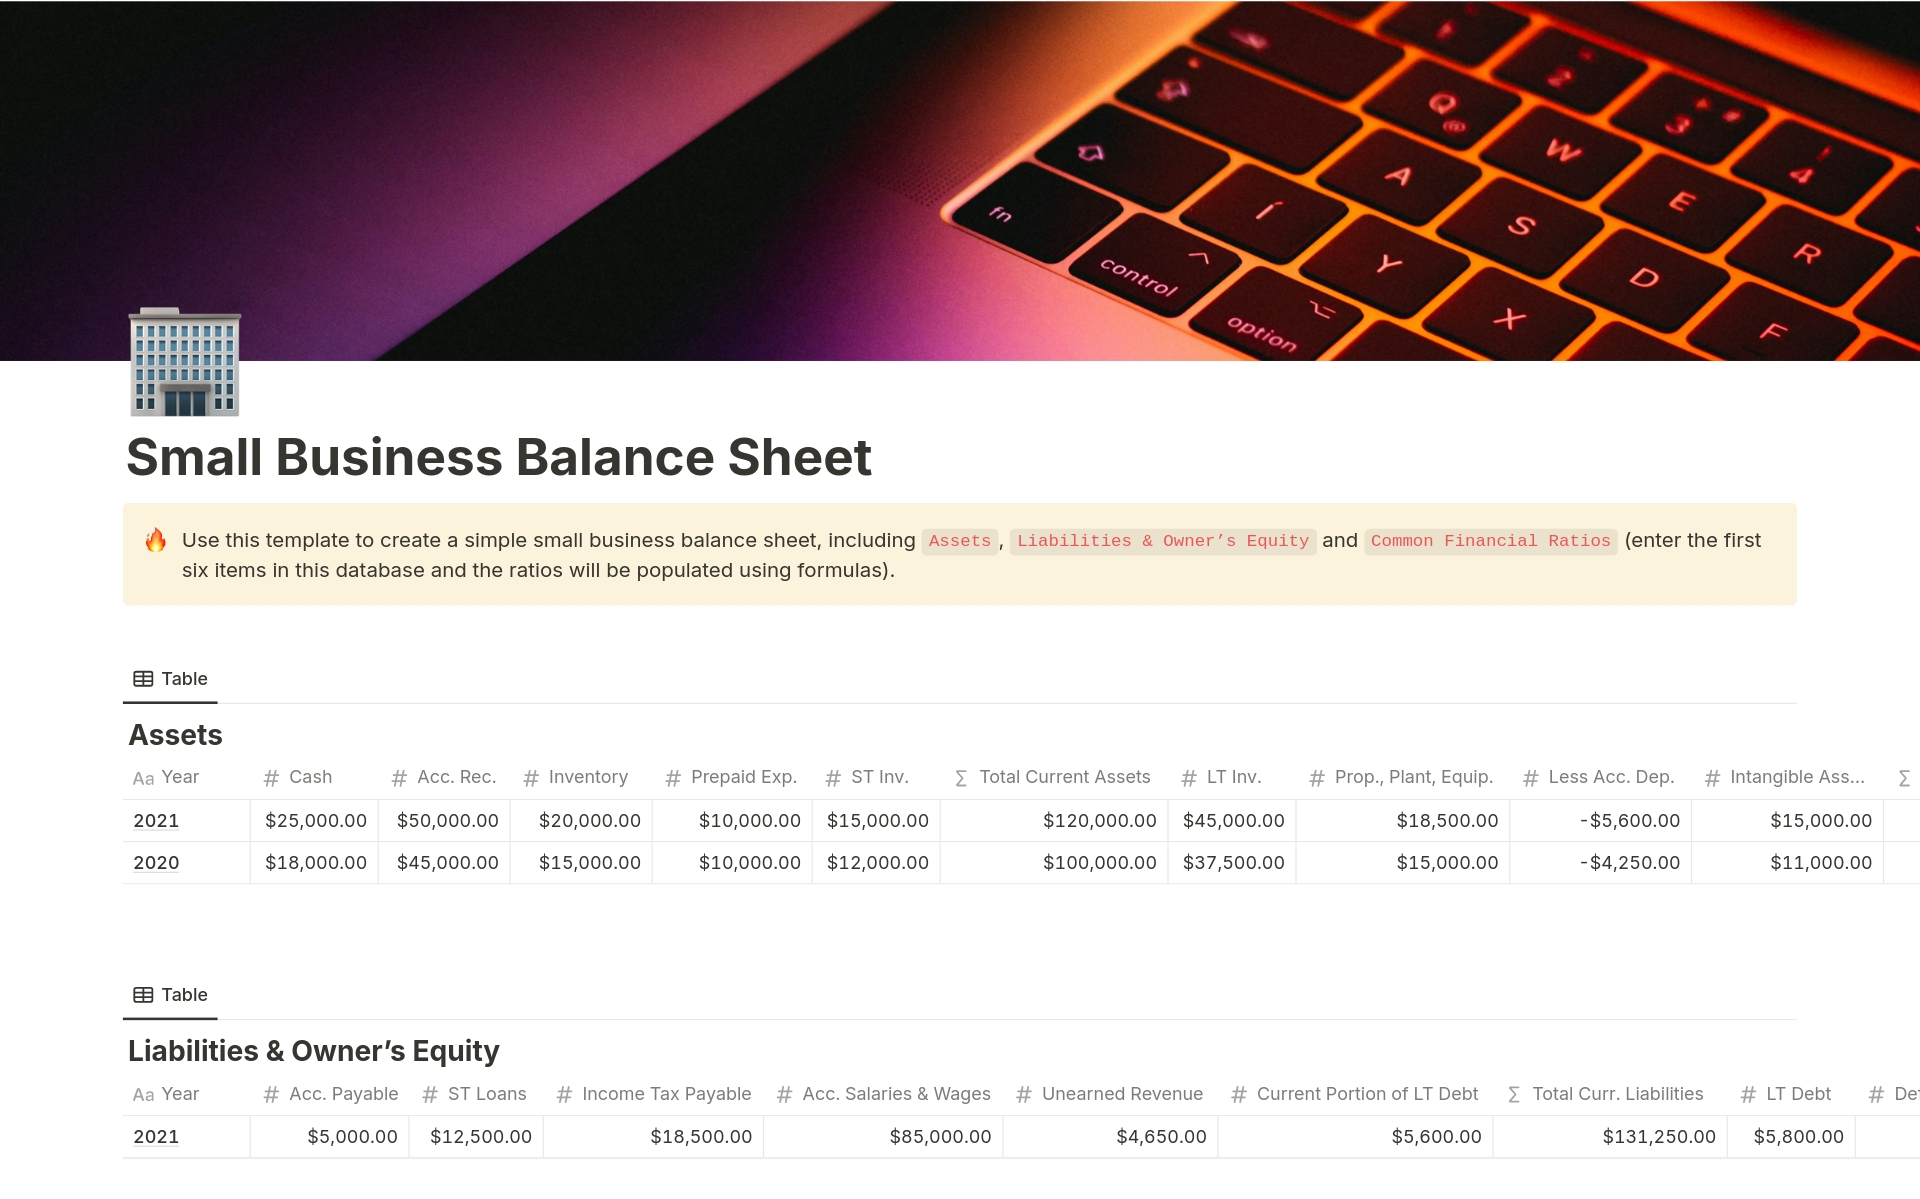 Use this template to create a simple small business balance sheet in Notion.